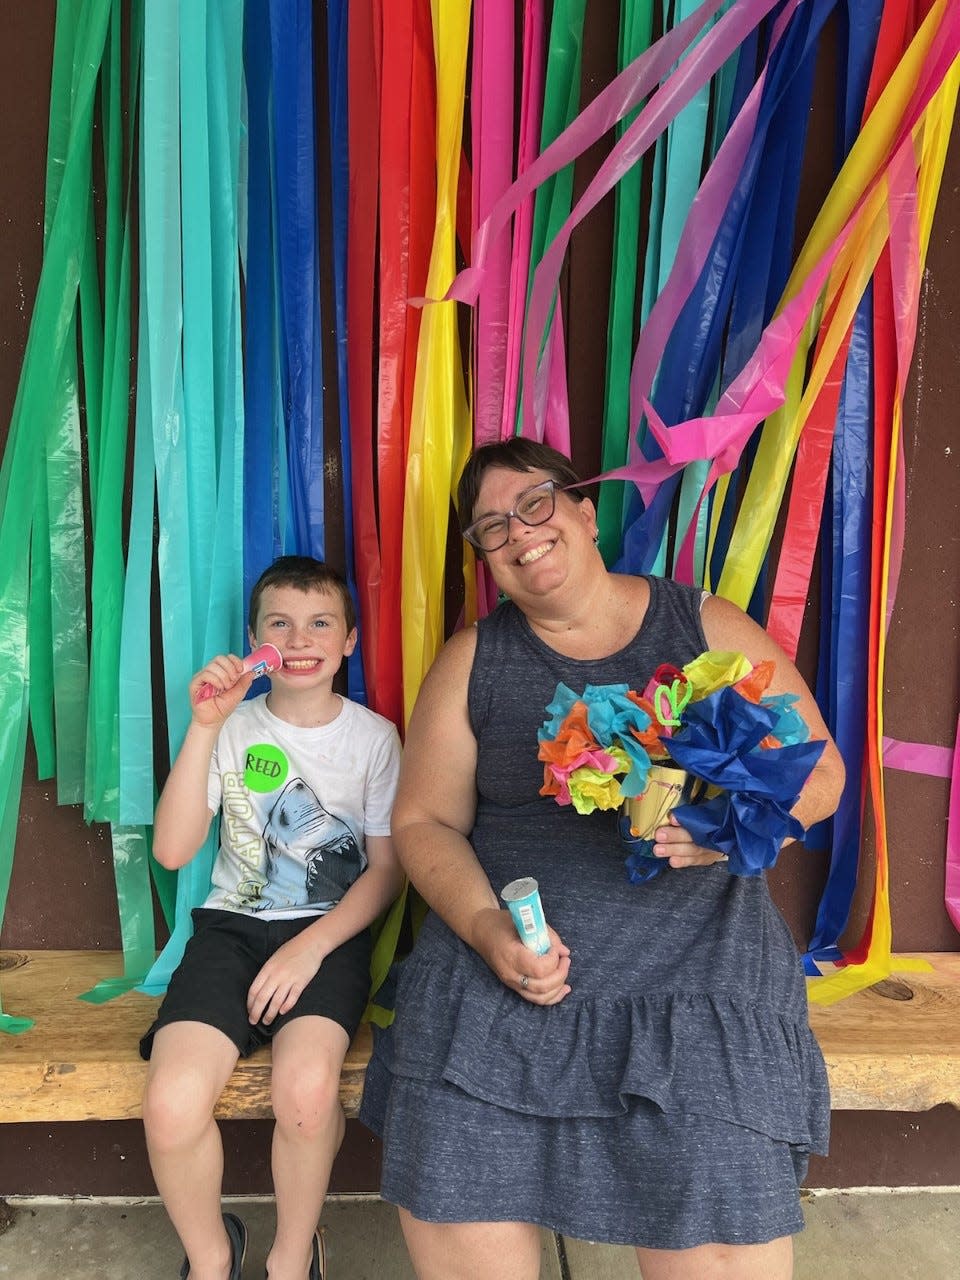 Nicole Willis, Roslyn Carney's best friend, said Carney's son Reed Fallon Carney, a Brush Creek Elementary fourth grade student pictured here with his mother, was "the love of her life."